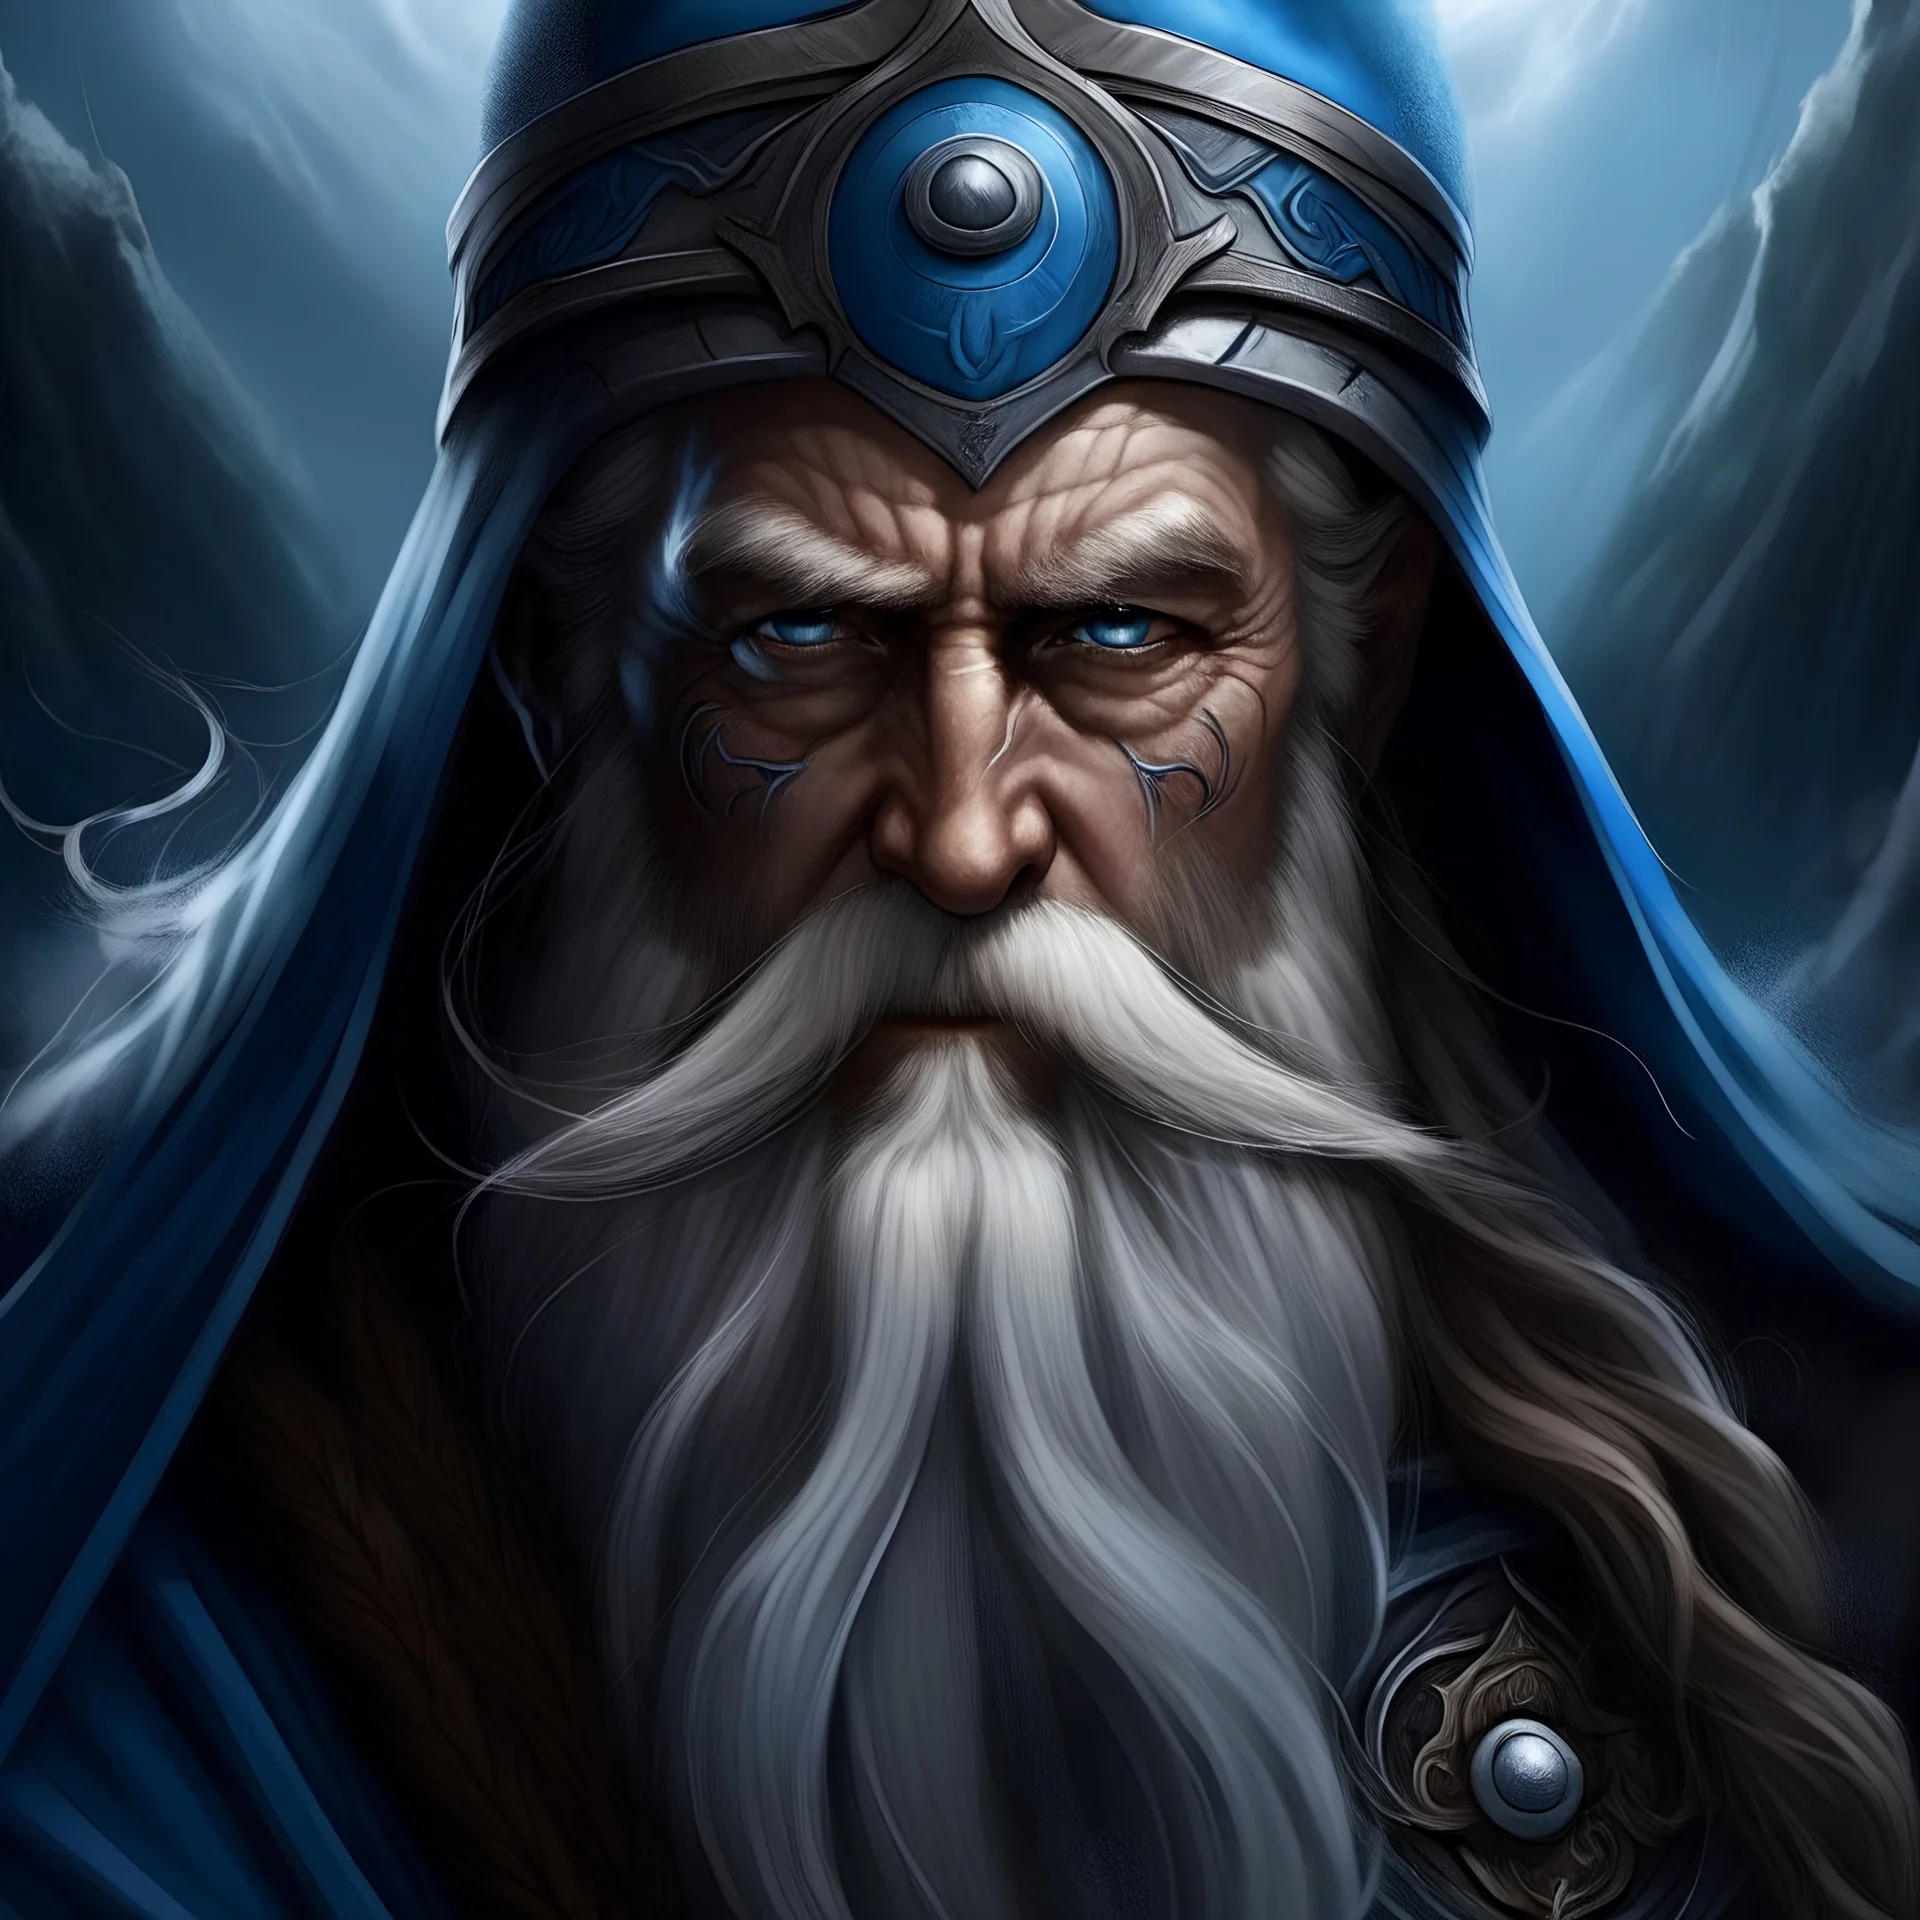 album art of Odin with a blue eye, looking over midgard